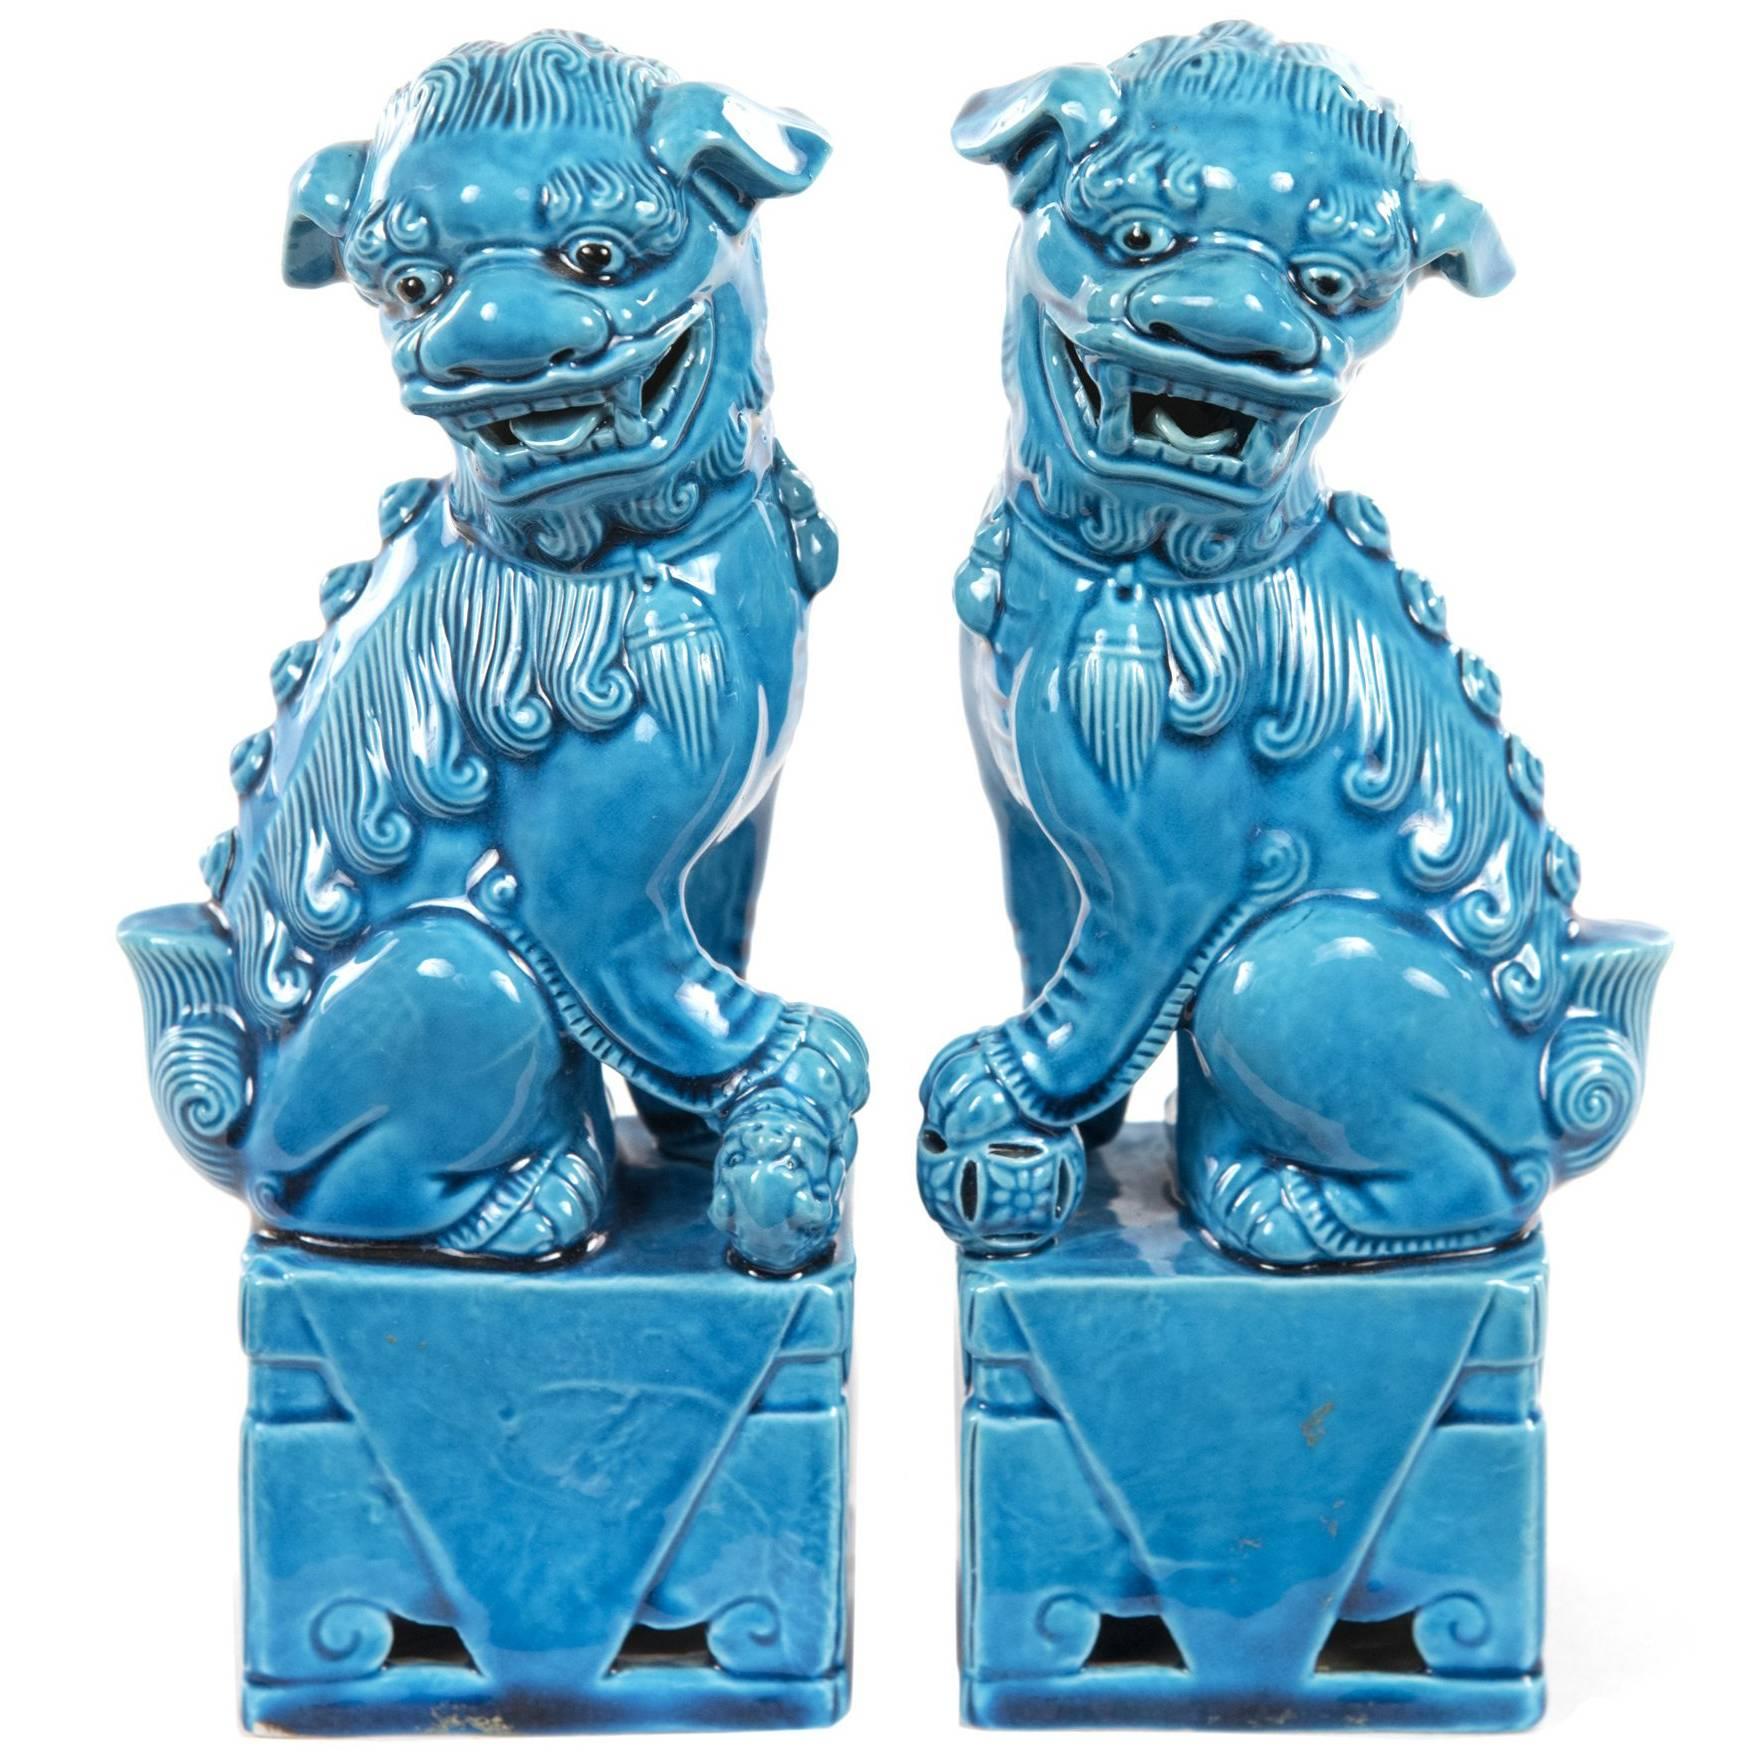 Pair of Turquoise-Glazed Porcelain Chinese Foo Dogs